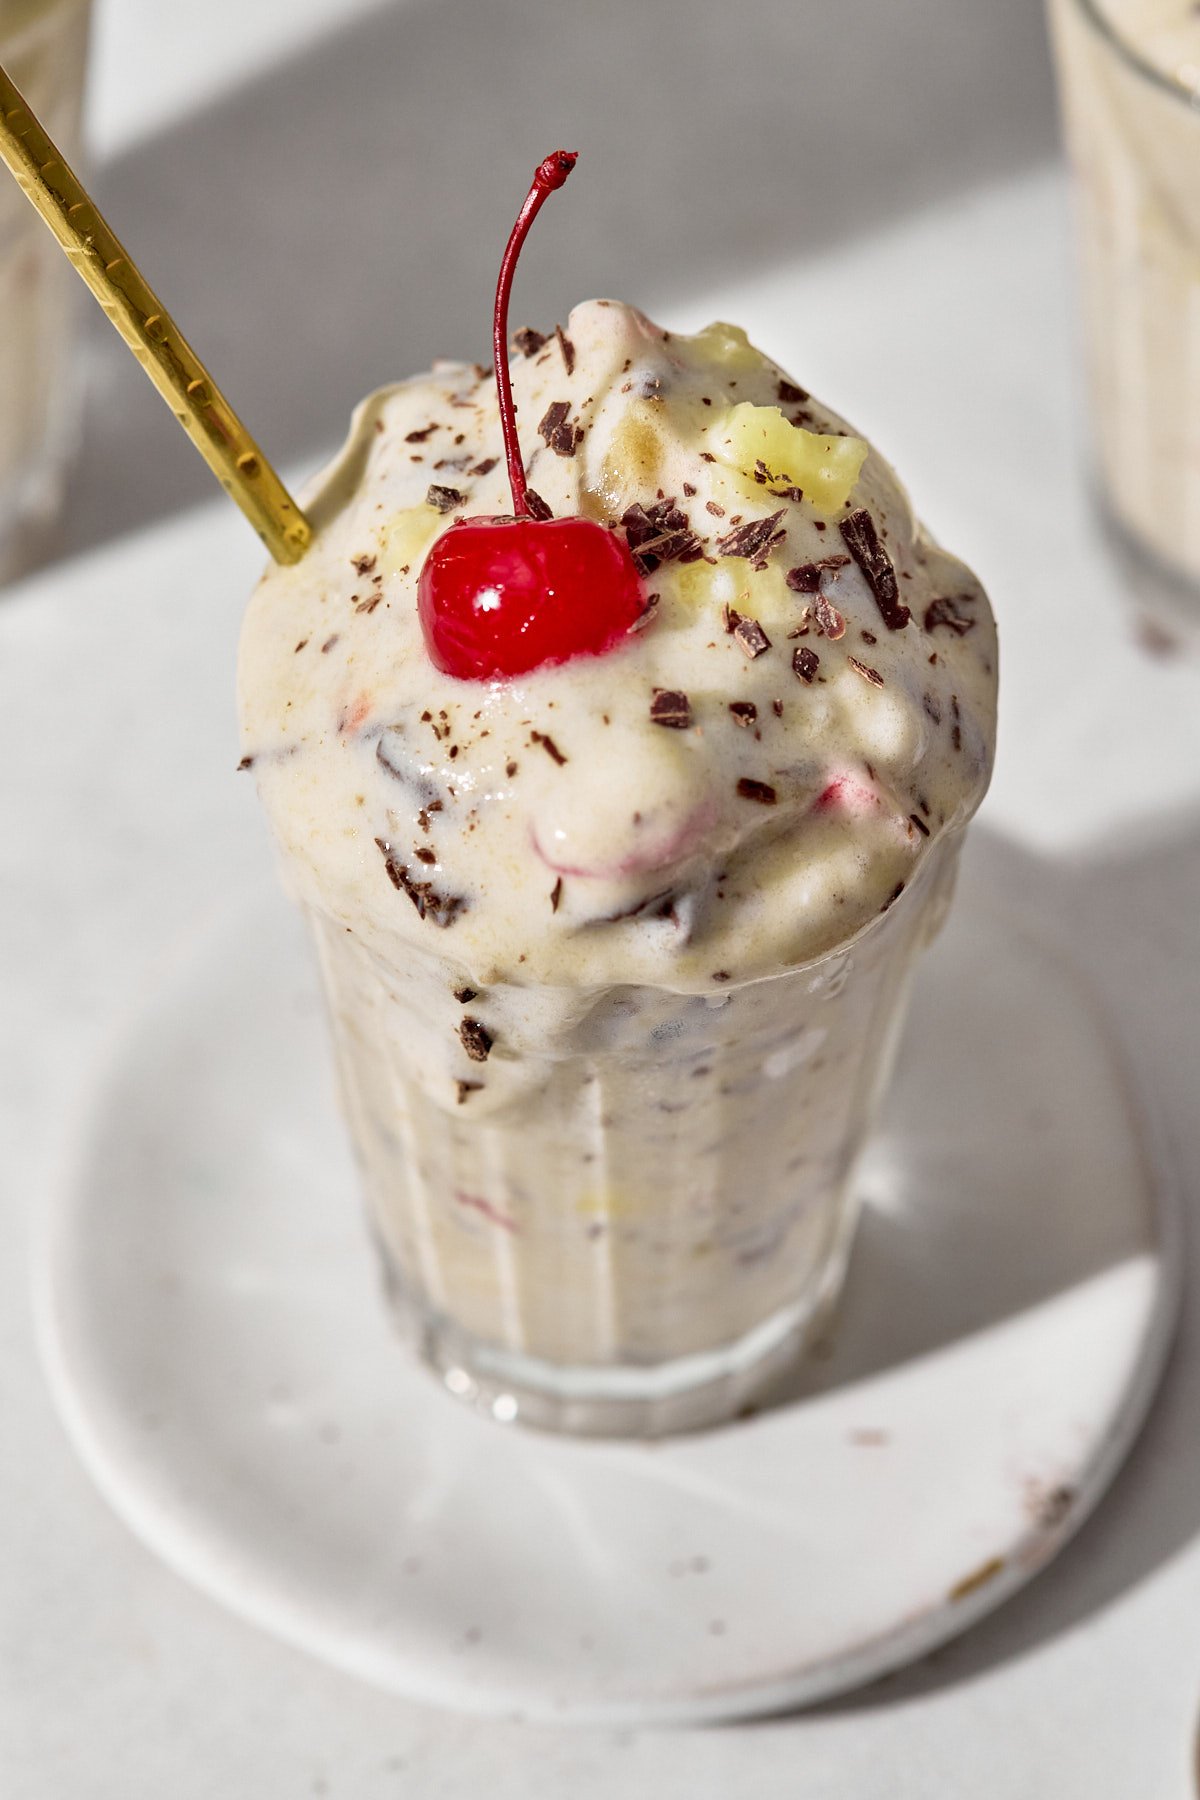 a close up shot of a banana split blizzard with a cherry on top and a gold straw